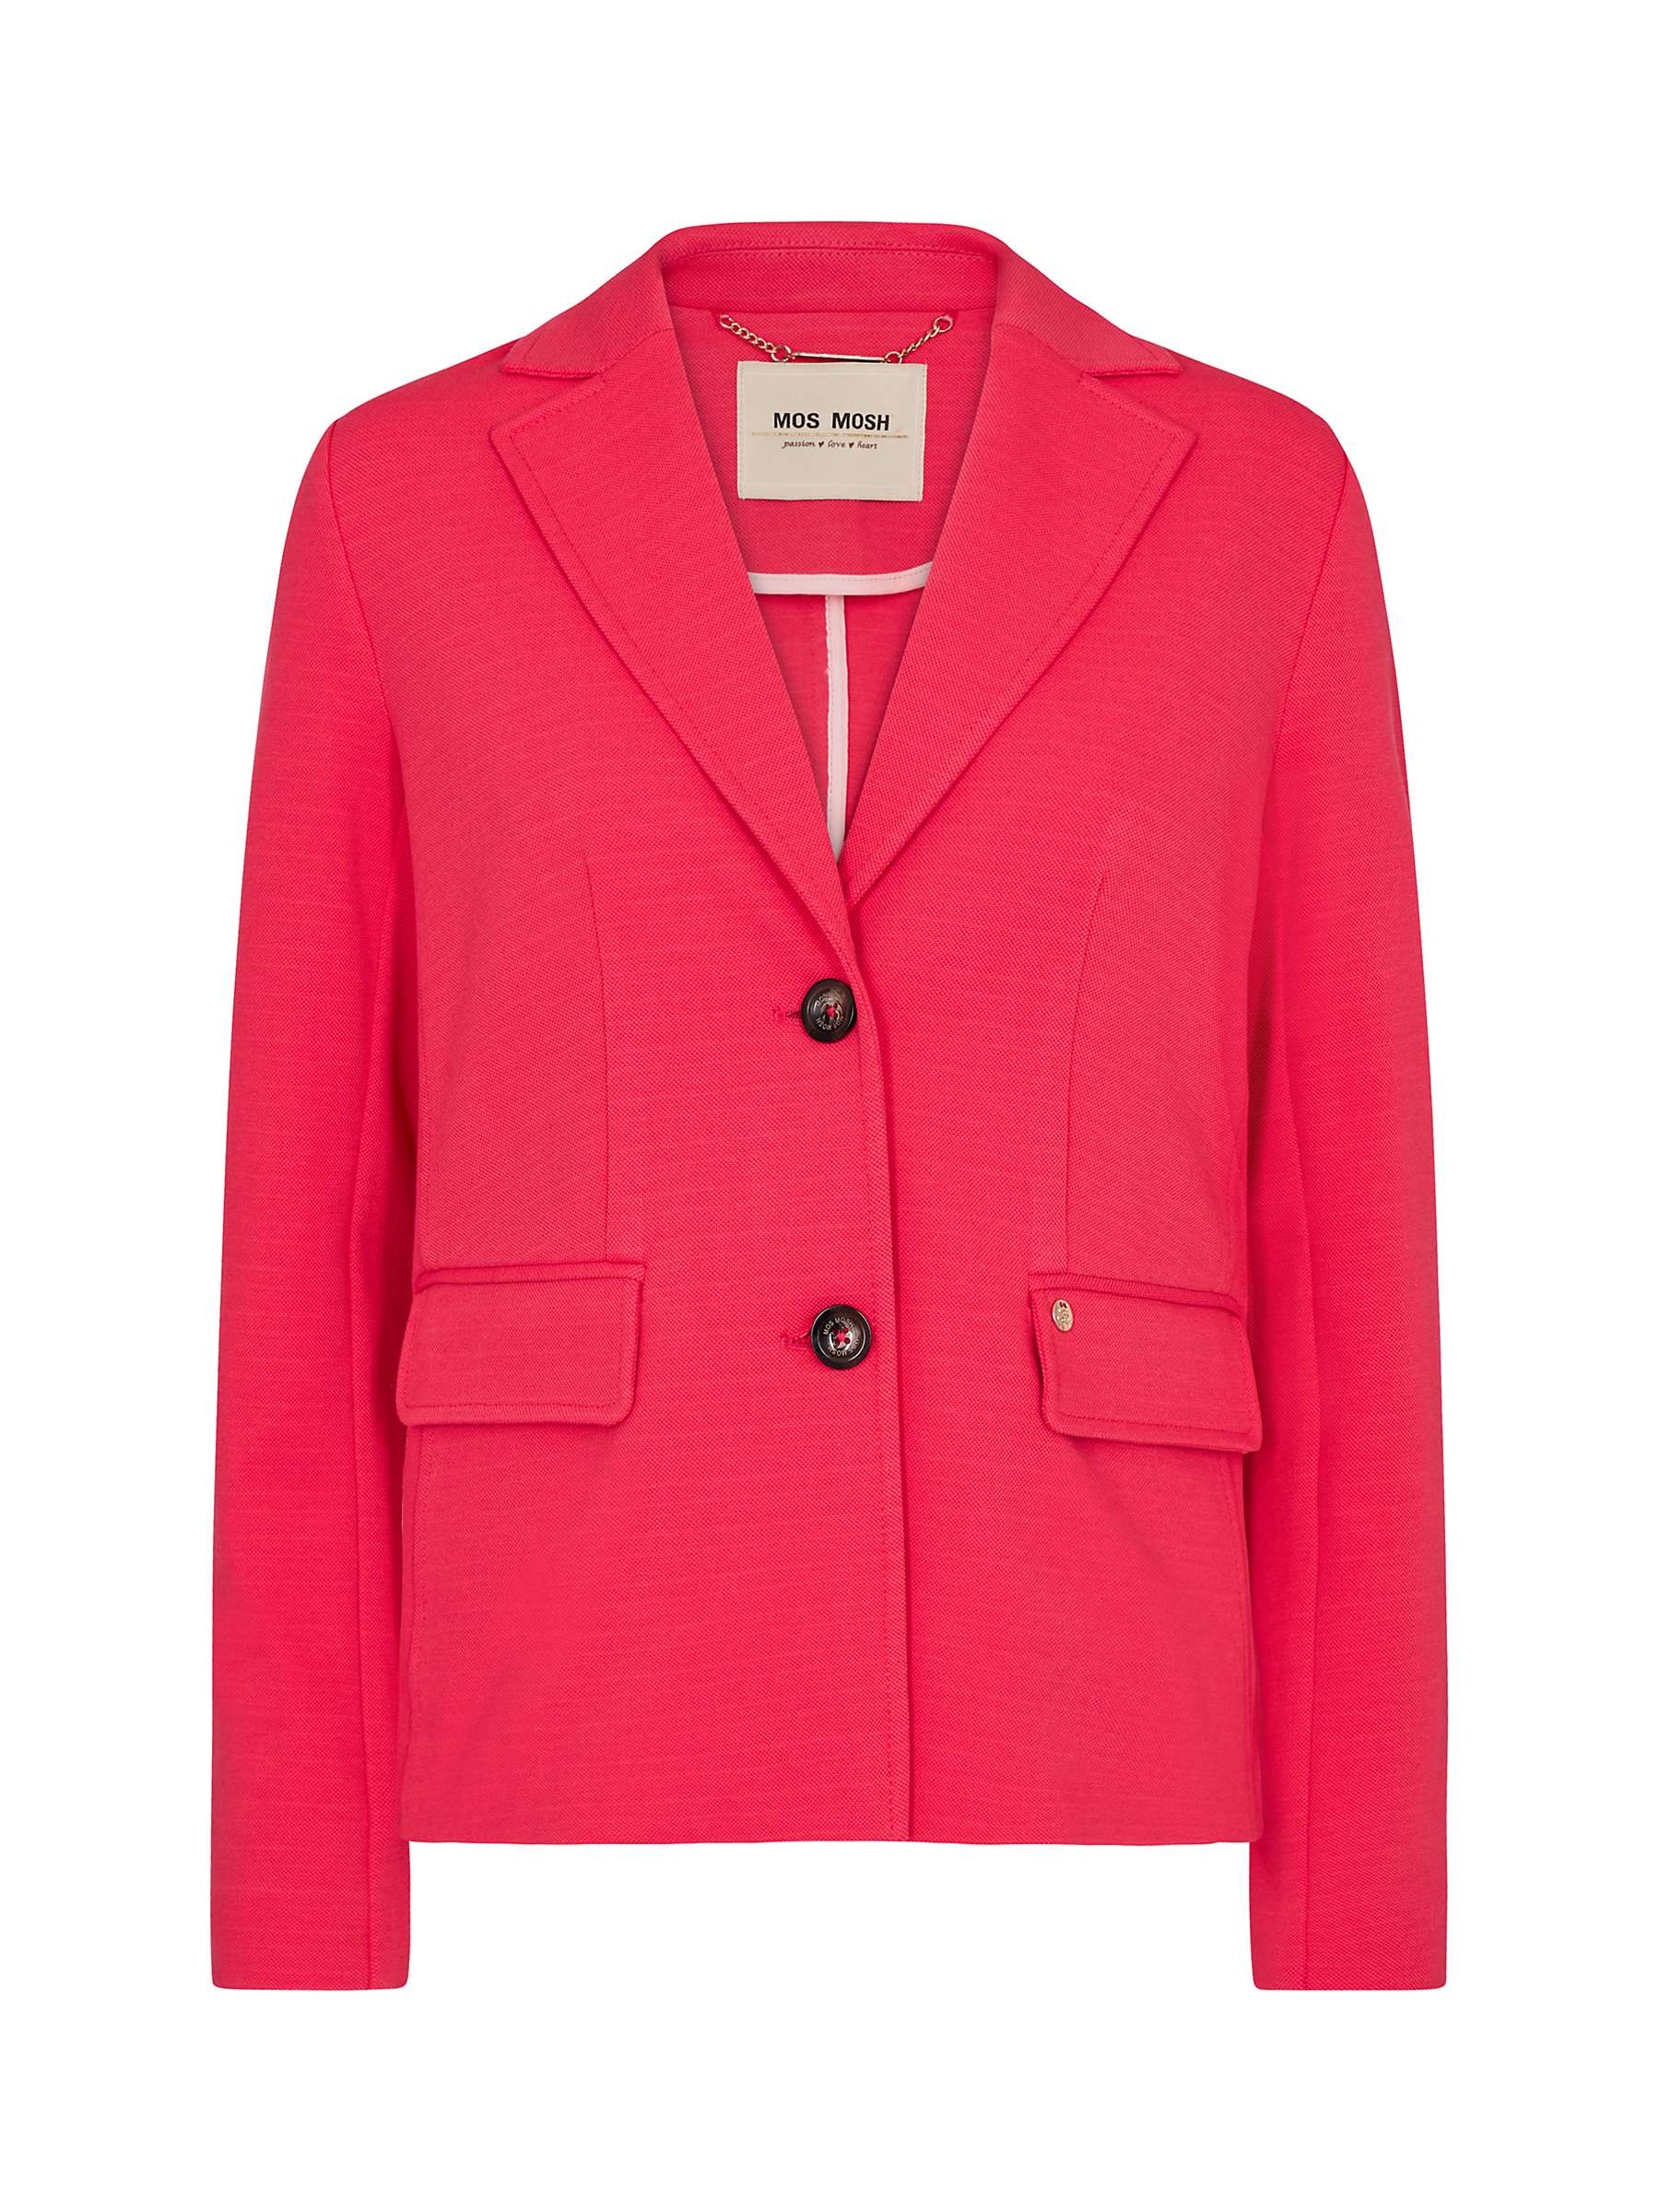 Buy MOS MOSH Topaz Single Breasted Pique Blazer, Teaberry Online at johnlewis.com